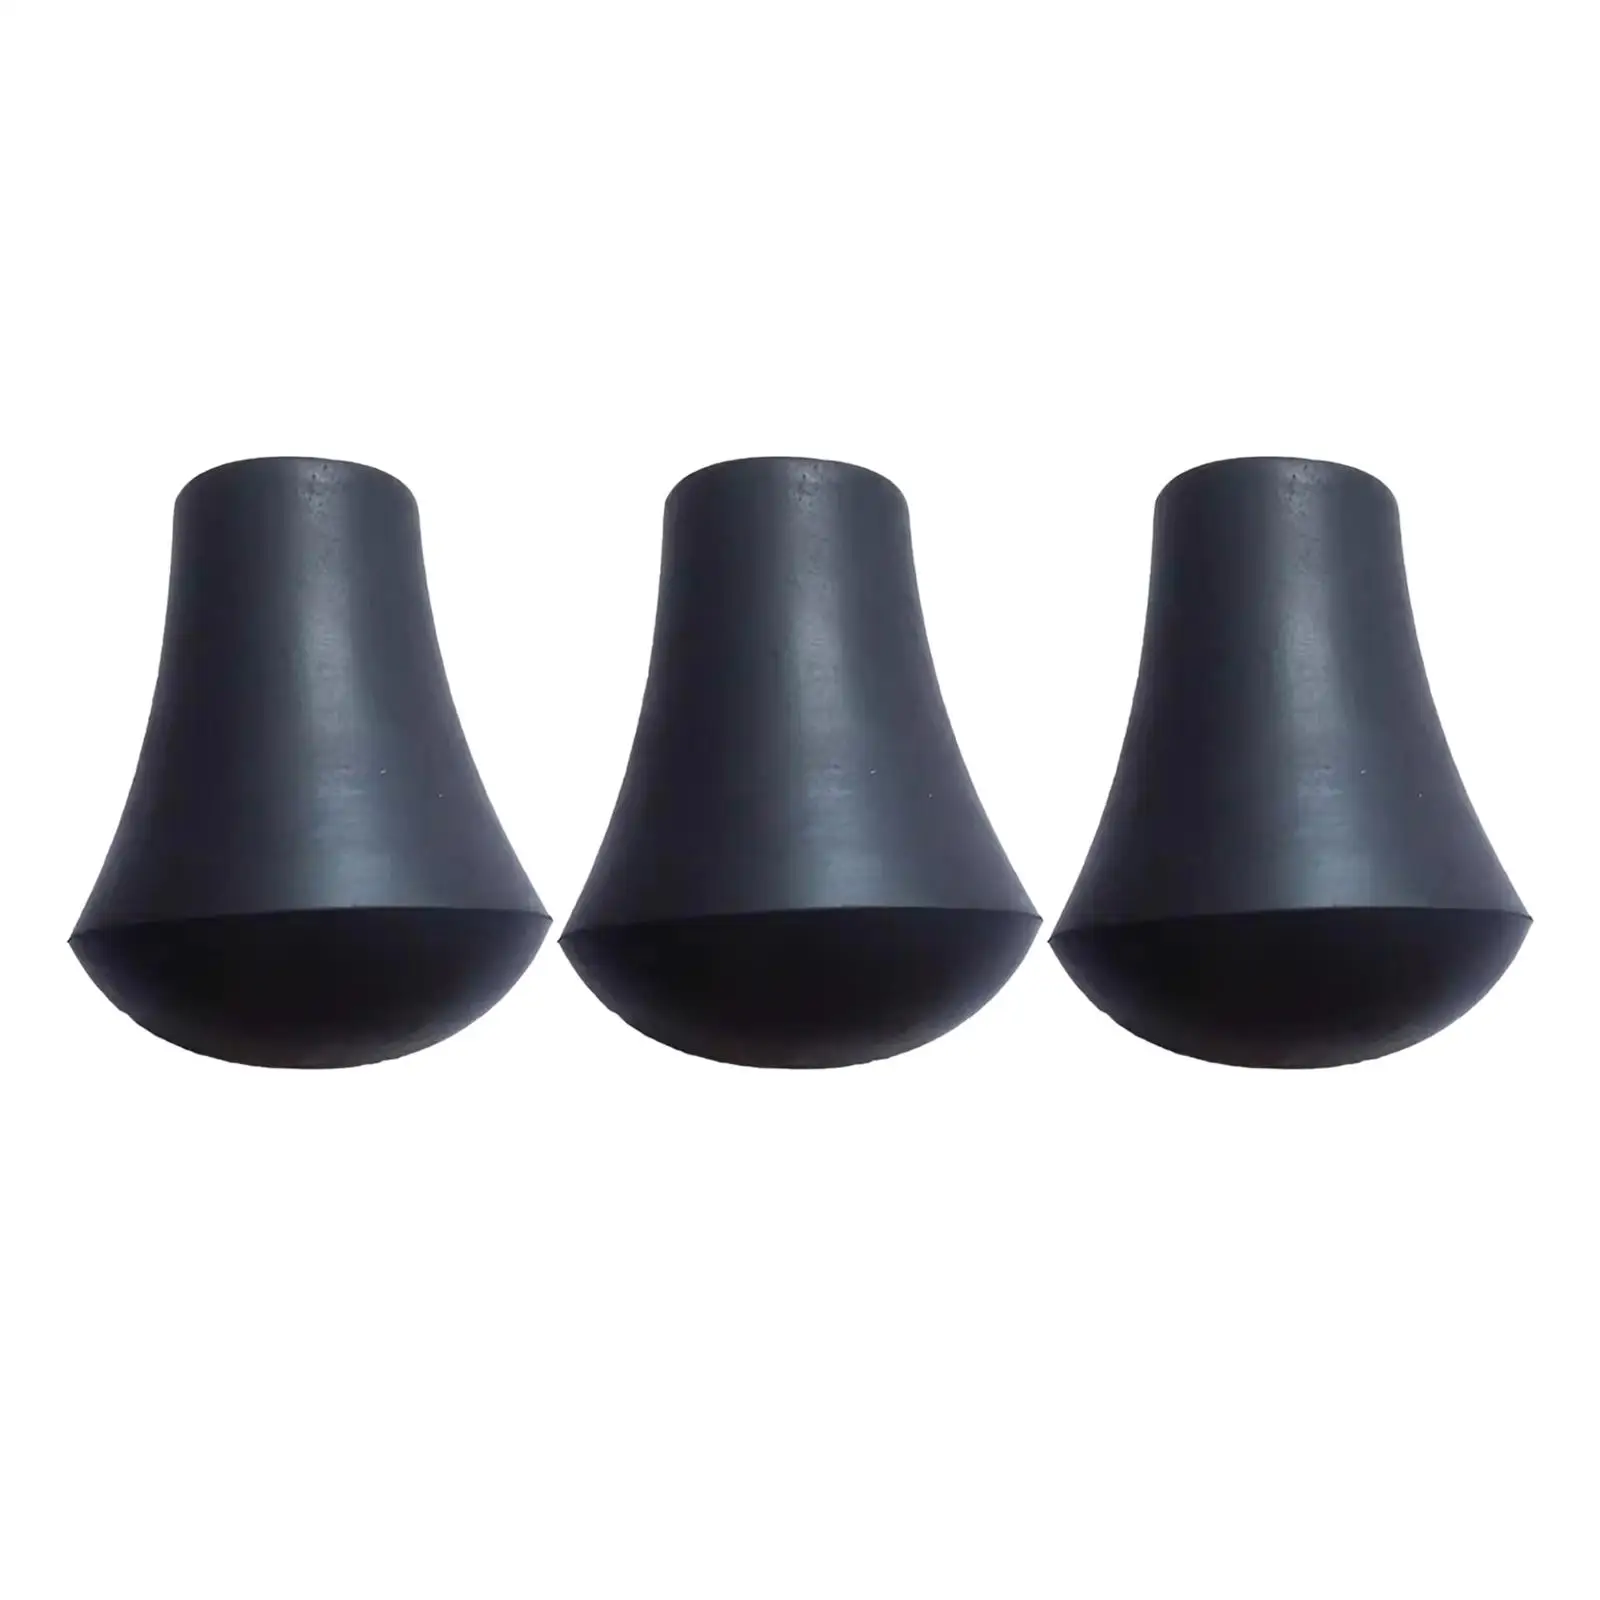 3 Pieces Drum Leg Protectors Replacement for Percussionist Percussion Parts